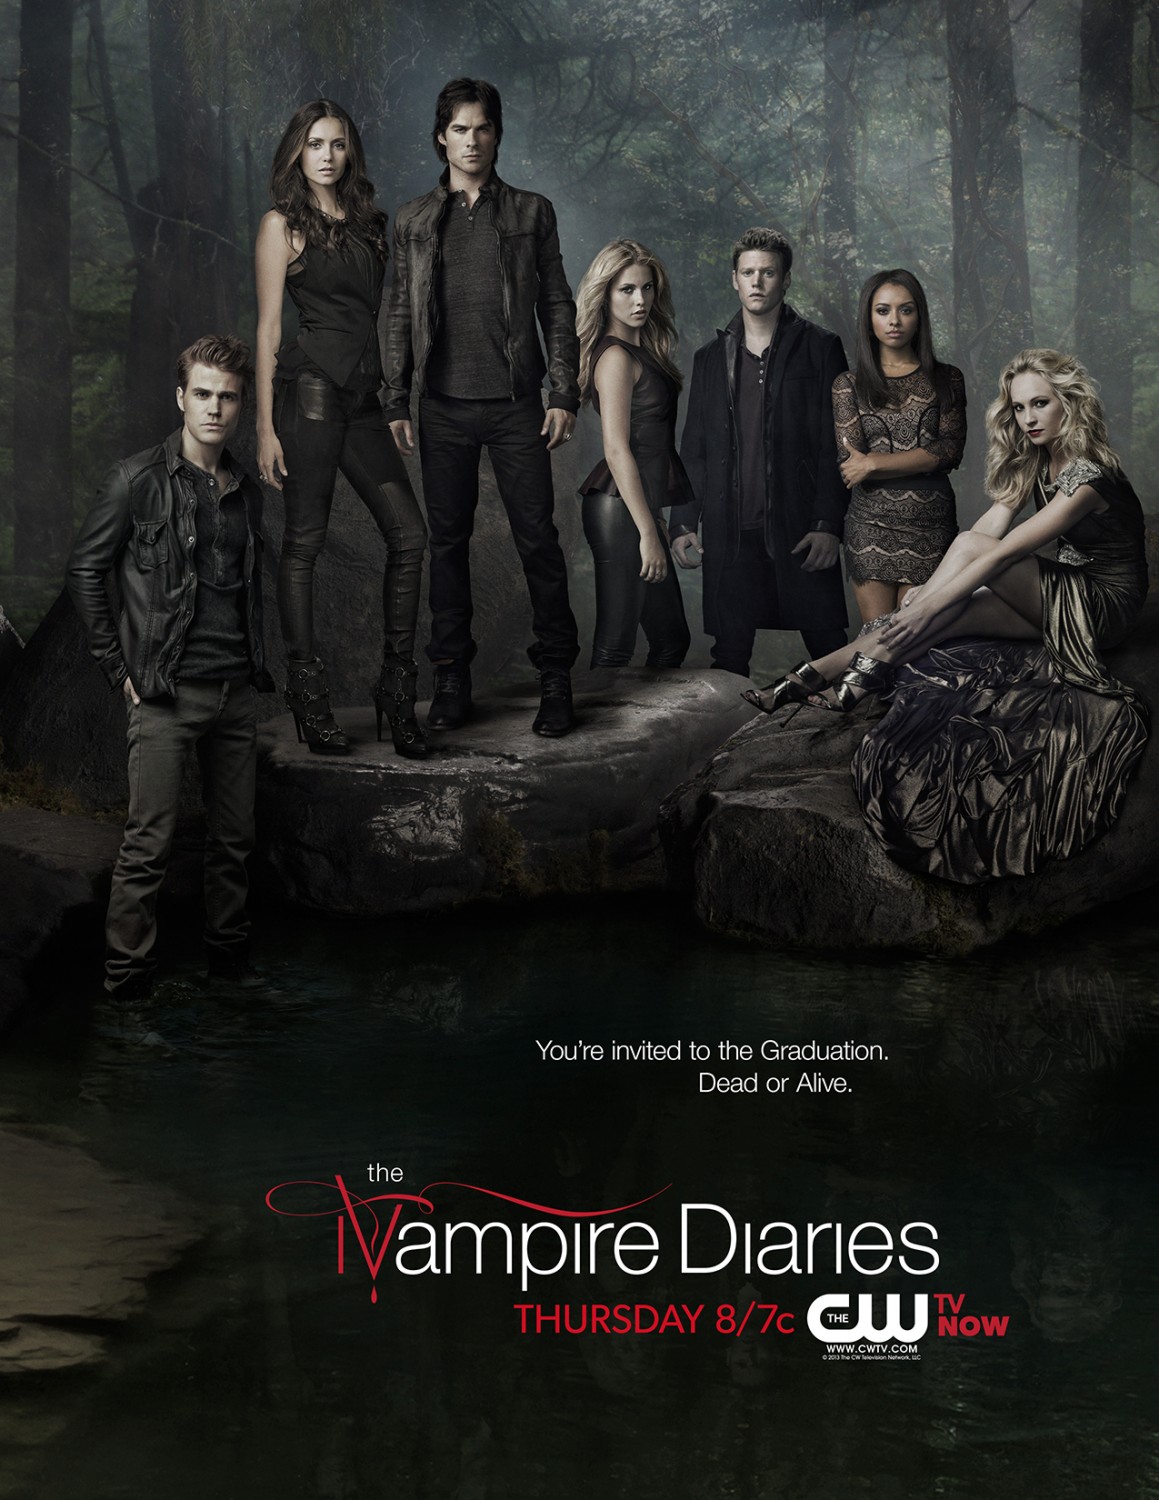 The Vampire Diaries (44 of 61) Extra Large Movie Poster Image IMP